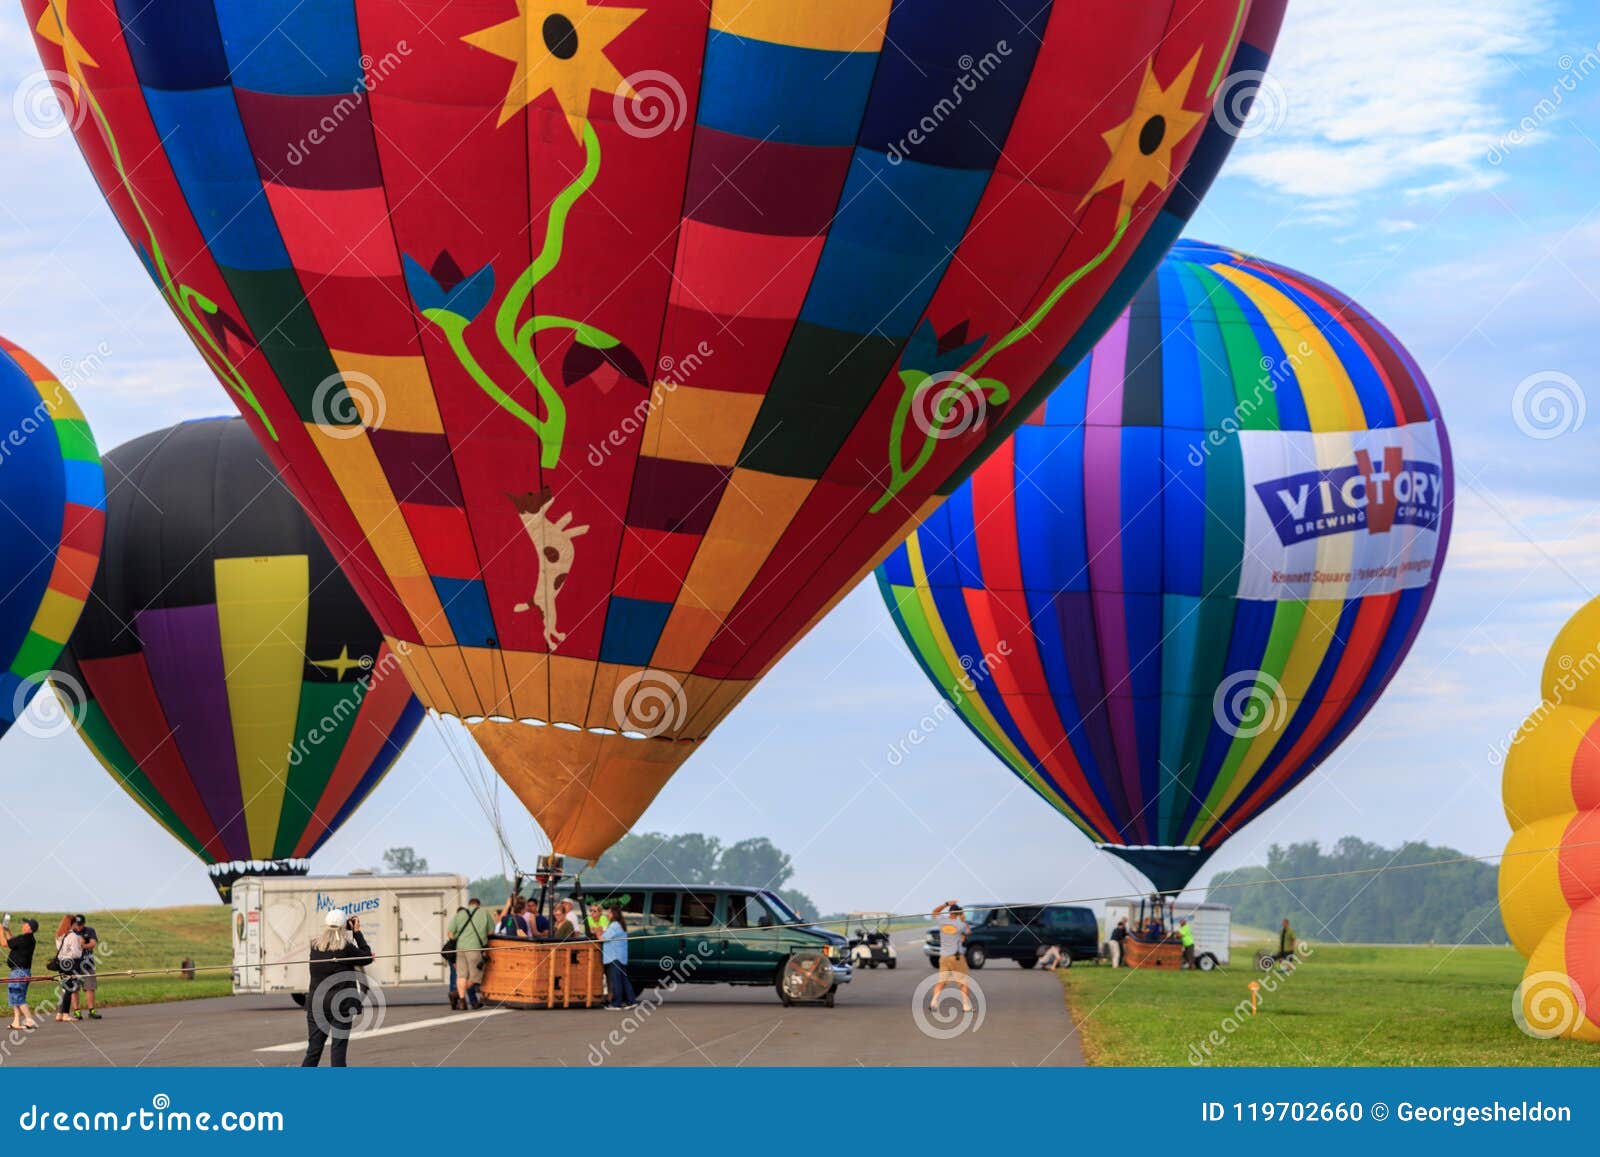 Balloon Ready For Flight Editorial Image Image Of Recreation